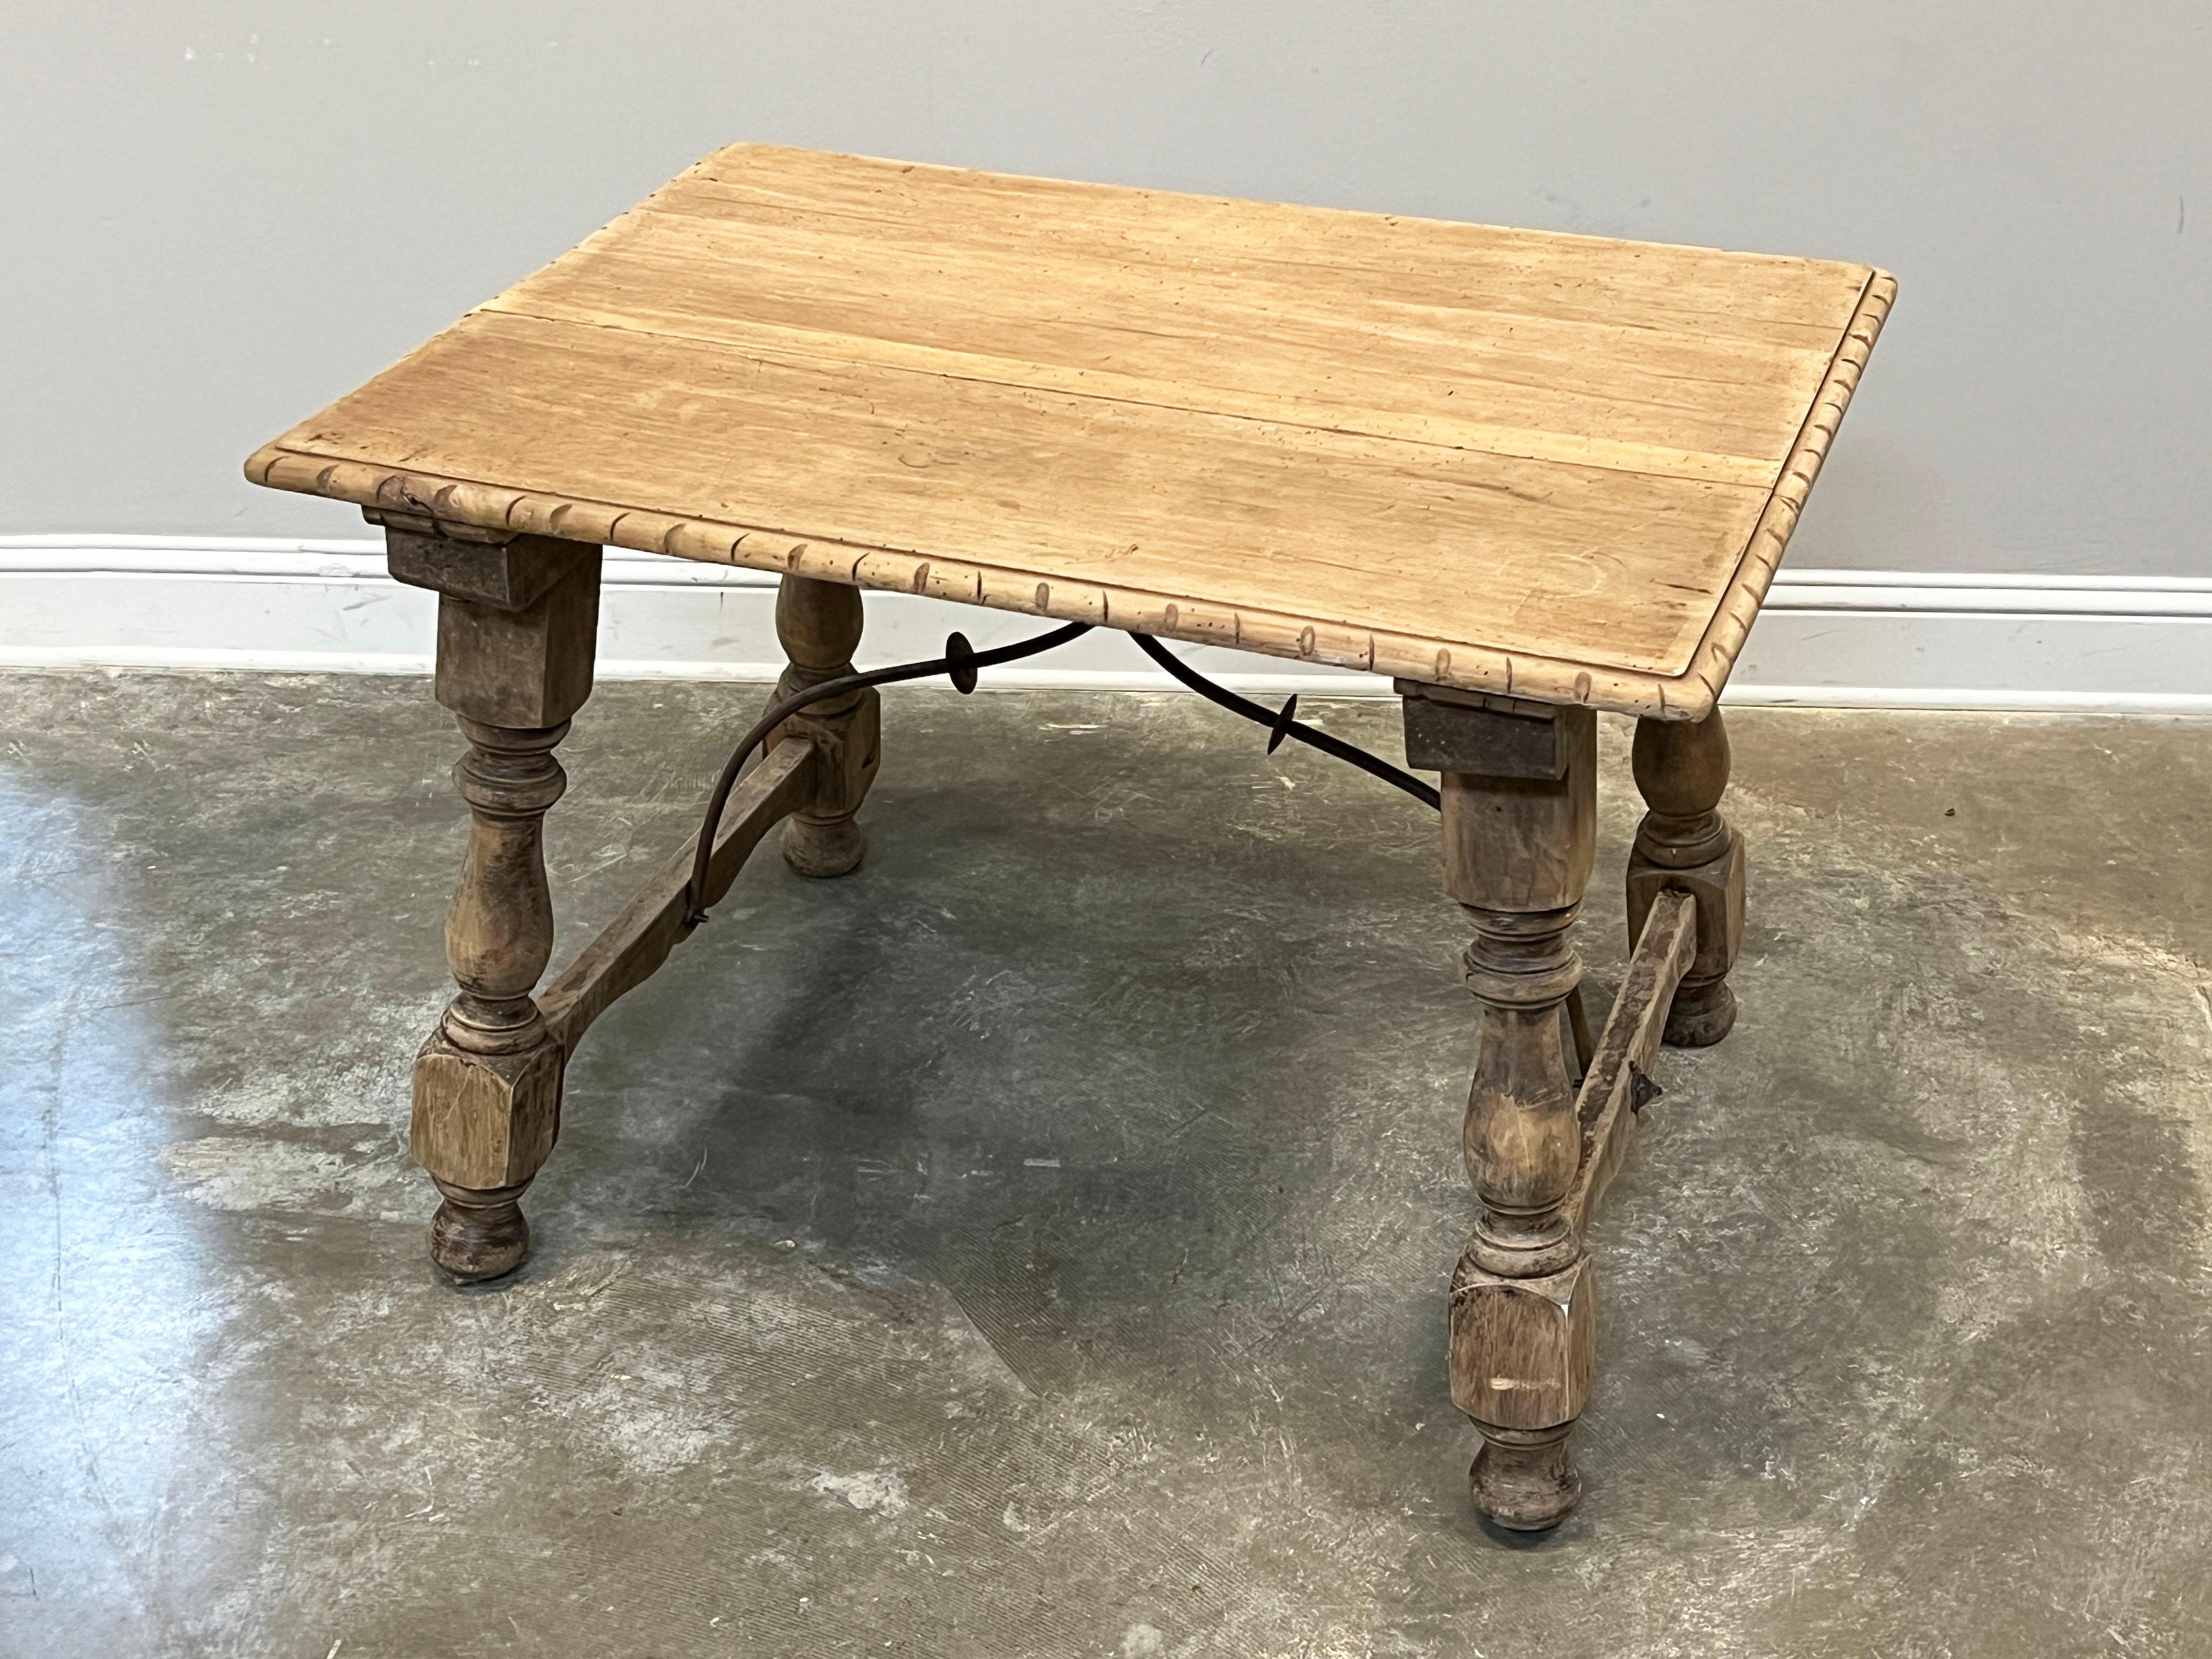 This country table exemplifies the rustic style seen in Southern France and Spain. The style as seen in Louis XIII country interpretations, developed in France an Spain and mirror the style of the Renaissance. Hardy woods such as oak were commonly